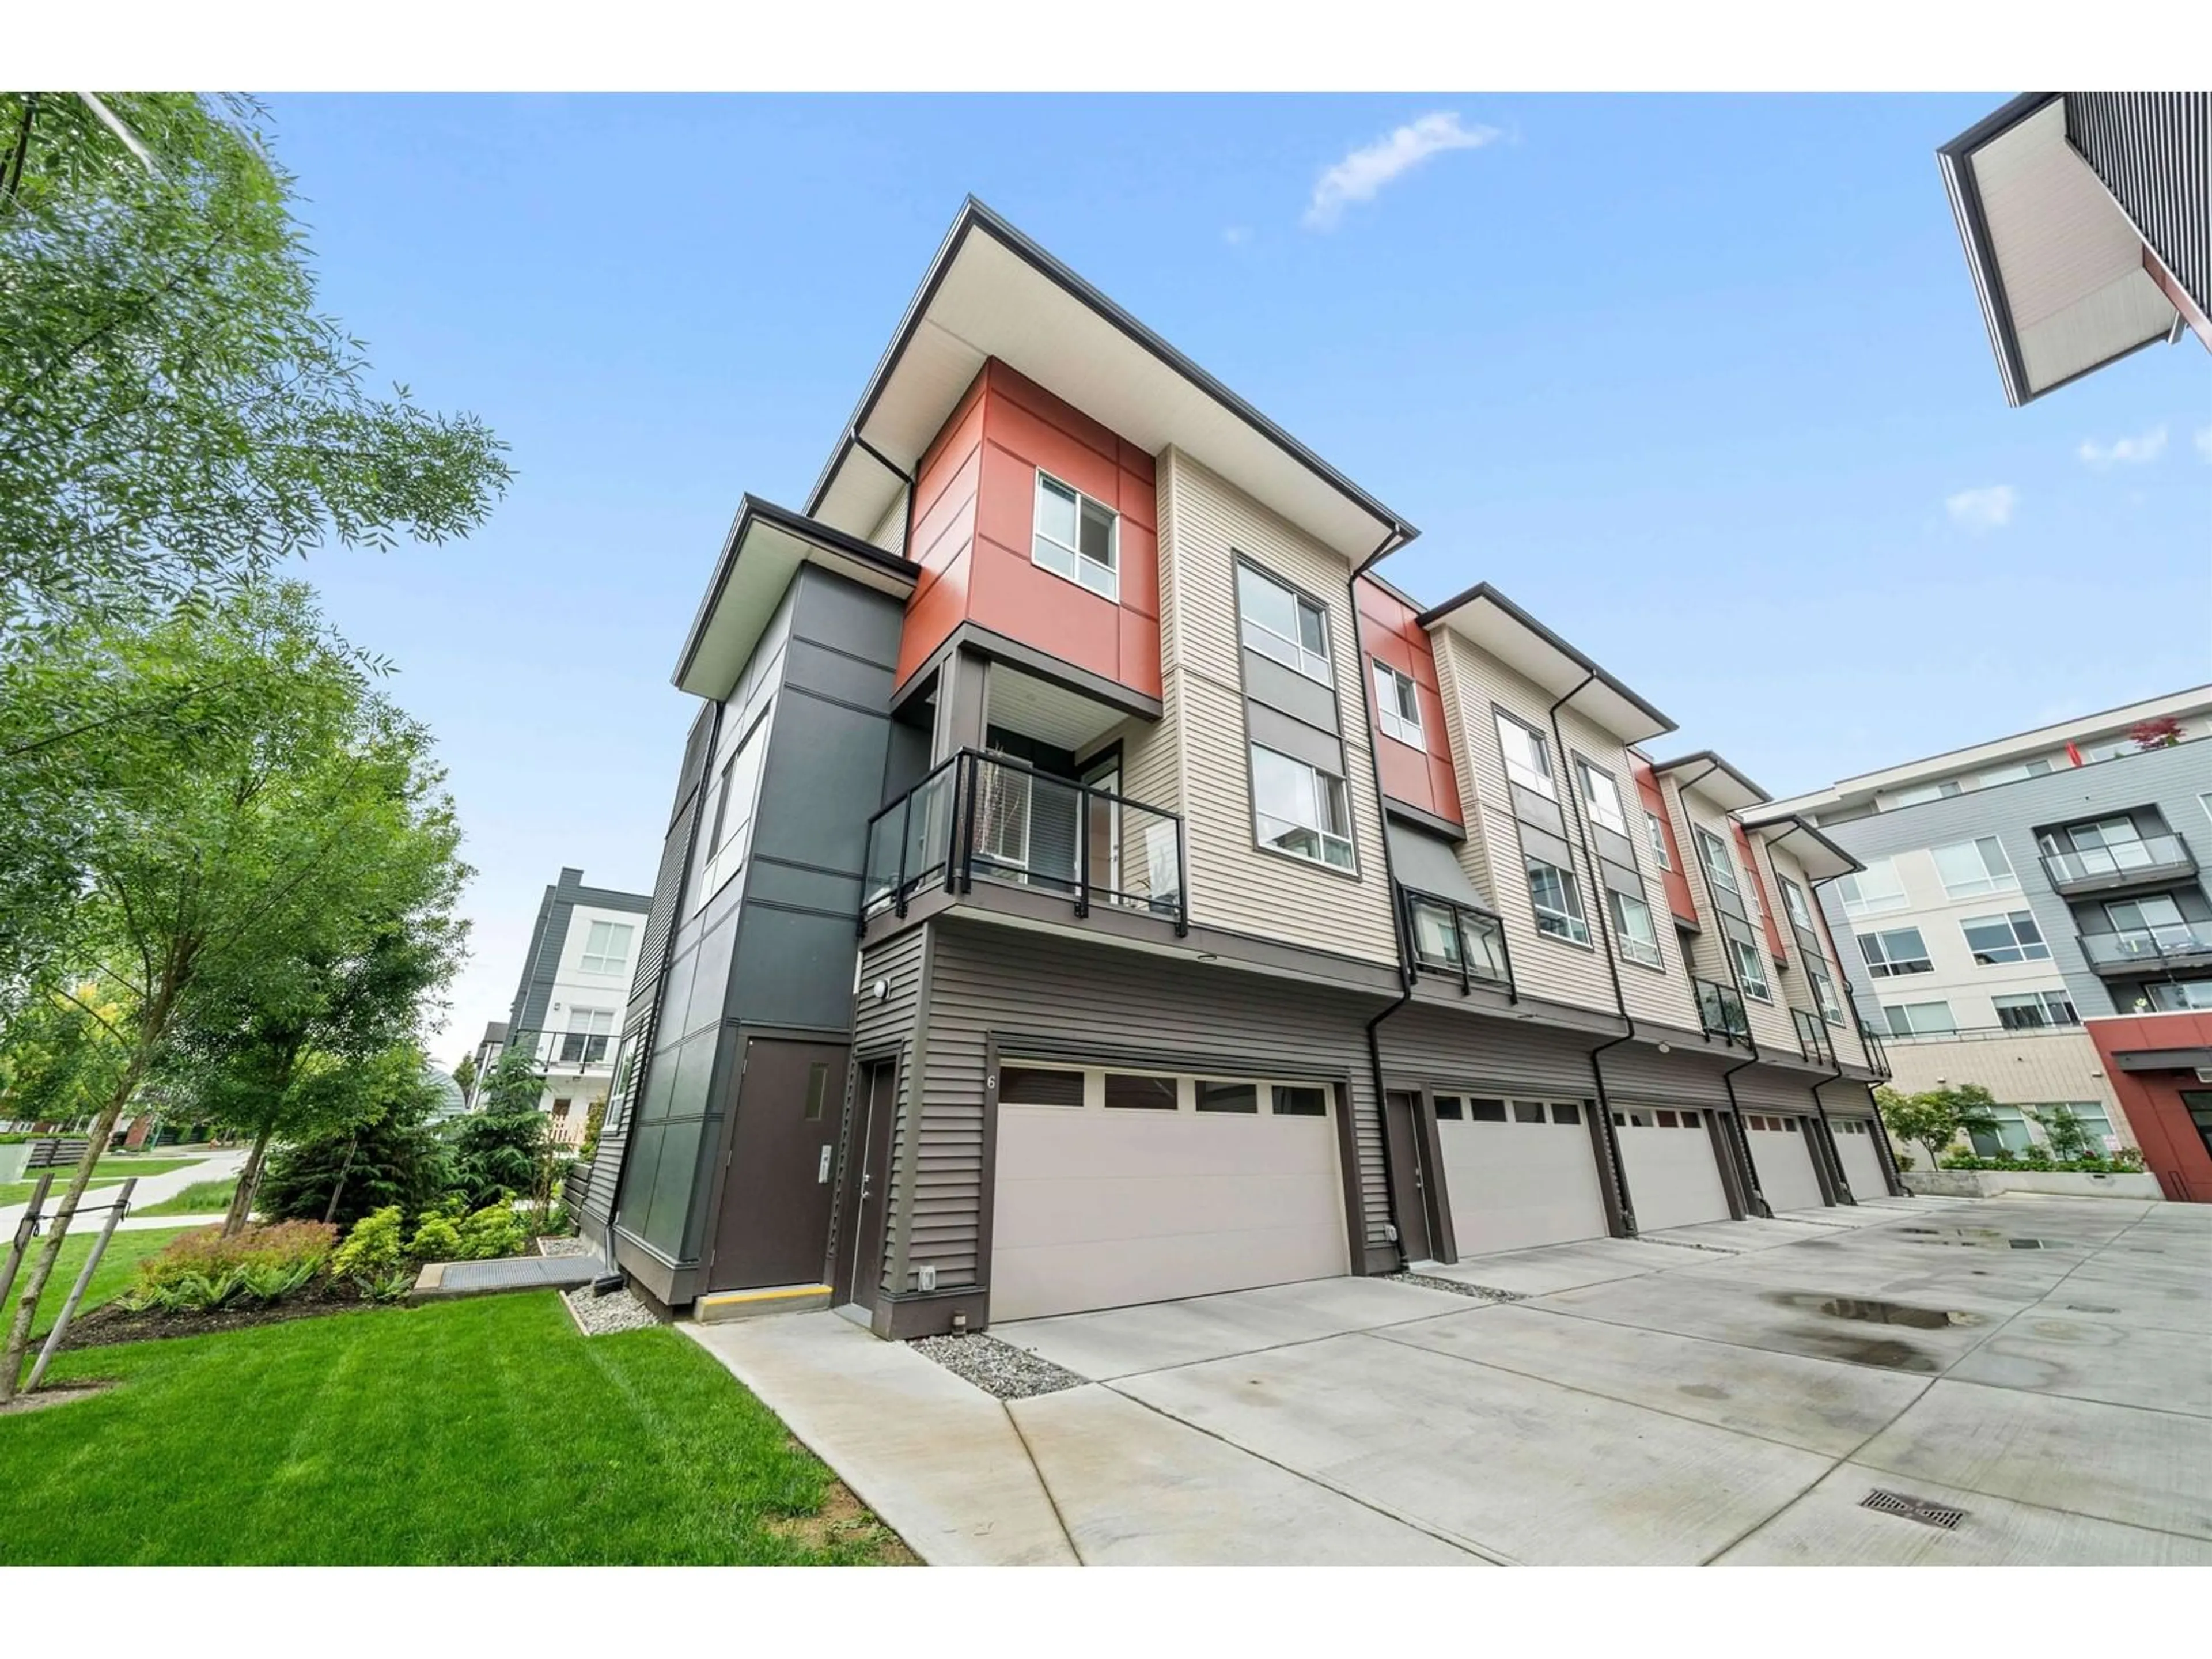 A pic from exterior of the house or condo for 6 7218 188 STREET, Surrey British Columbia V4N6W3